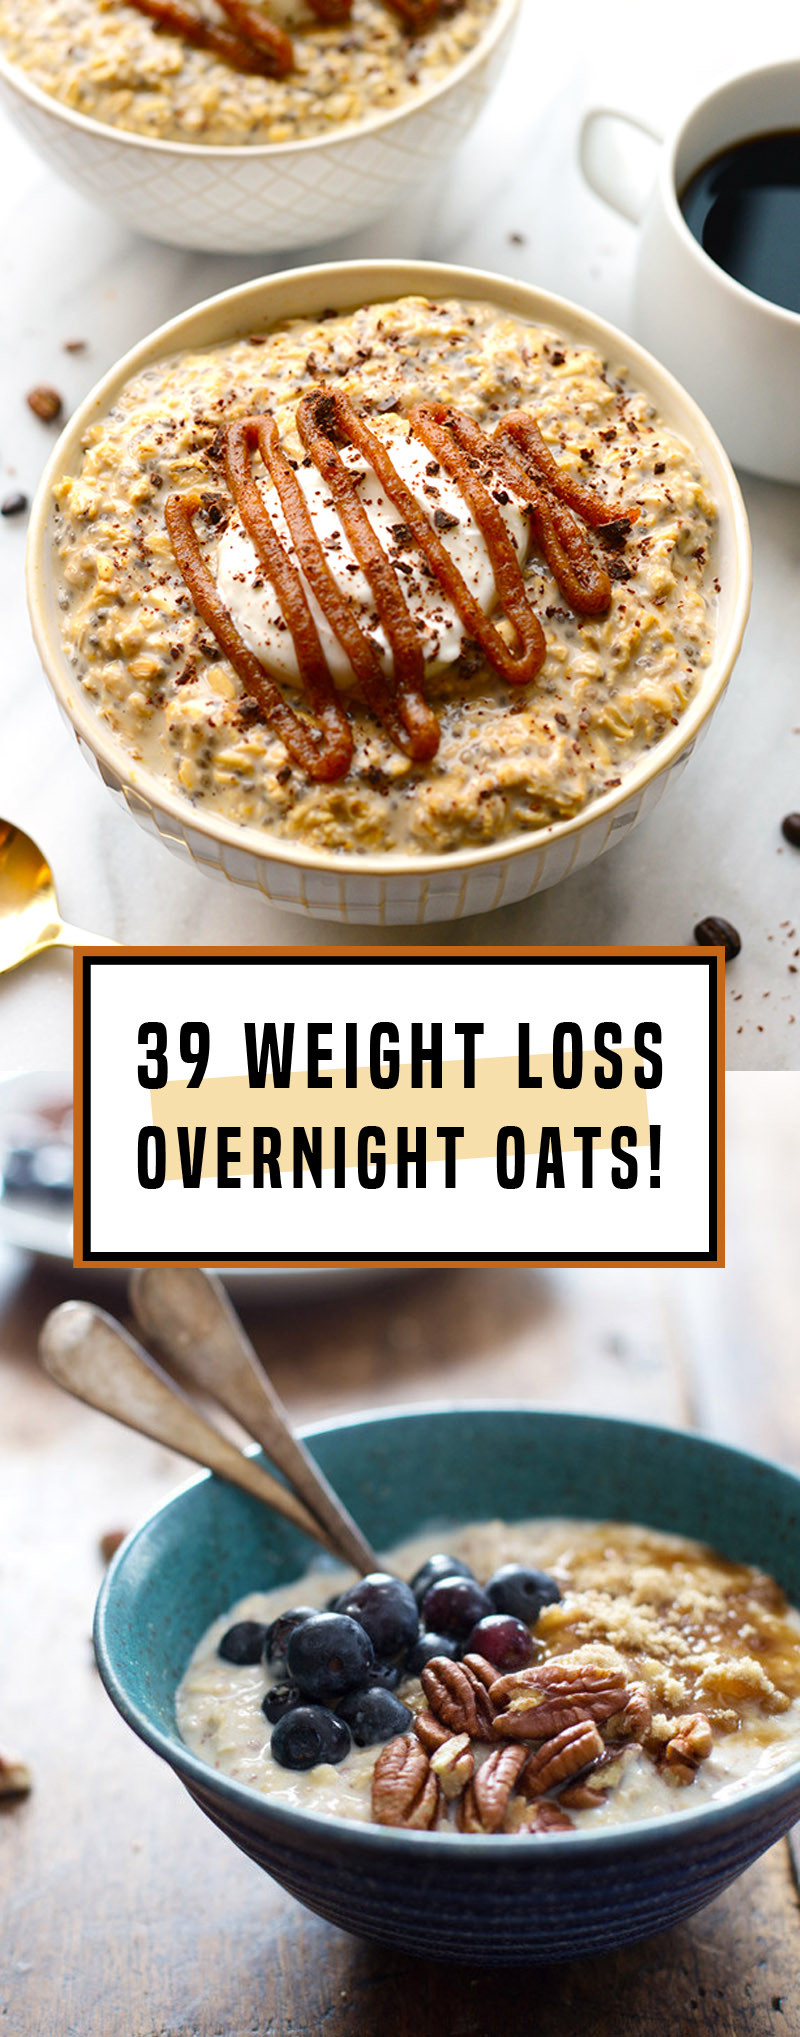 Oatmeal Recipes For Weight Loss
 39 Overnight Oats That Make The Best Weight Loss Breakfast